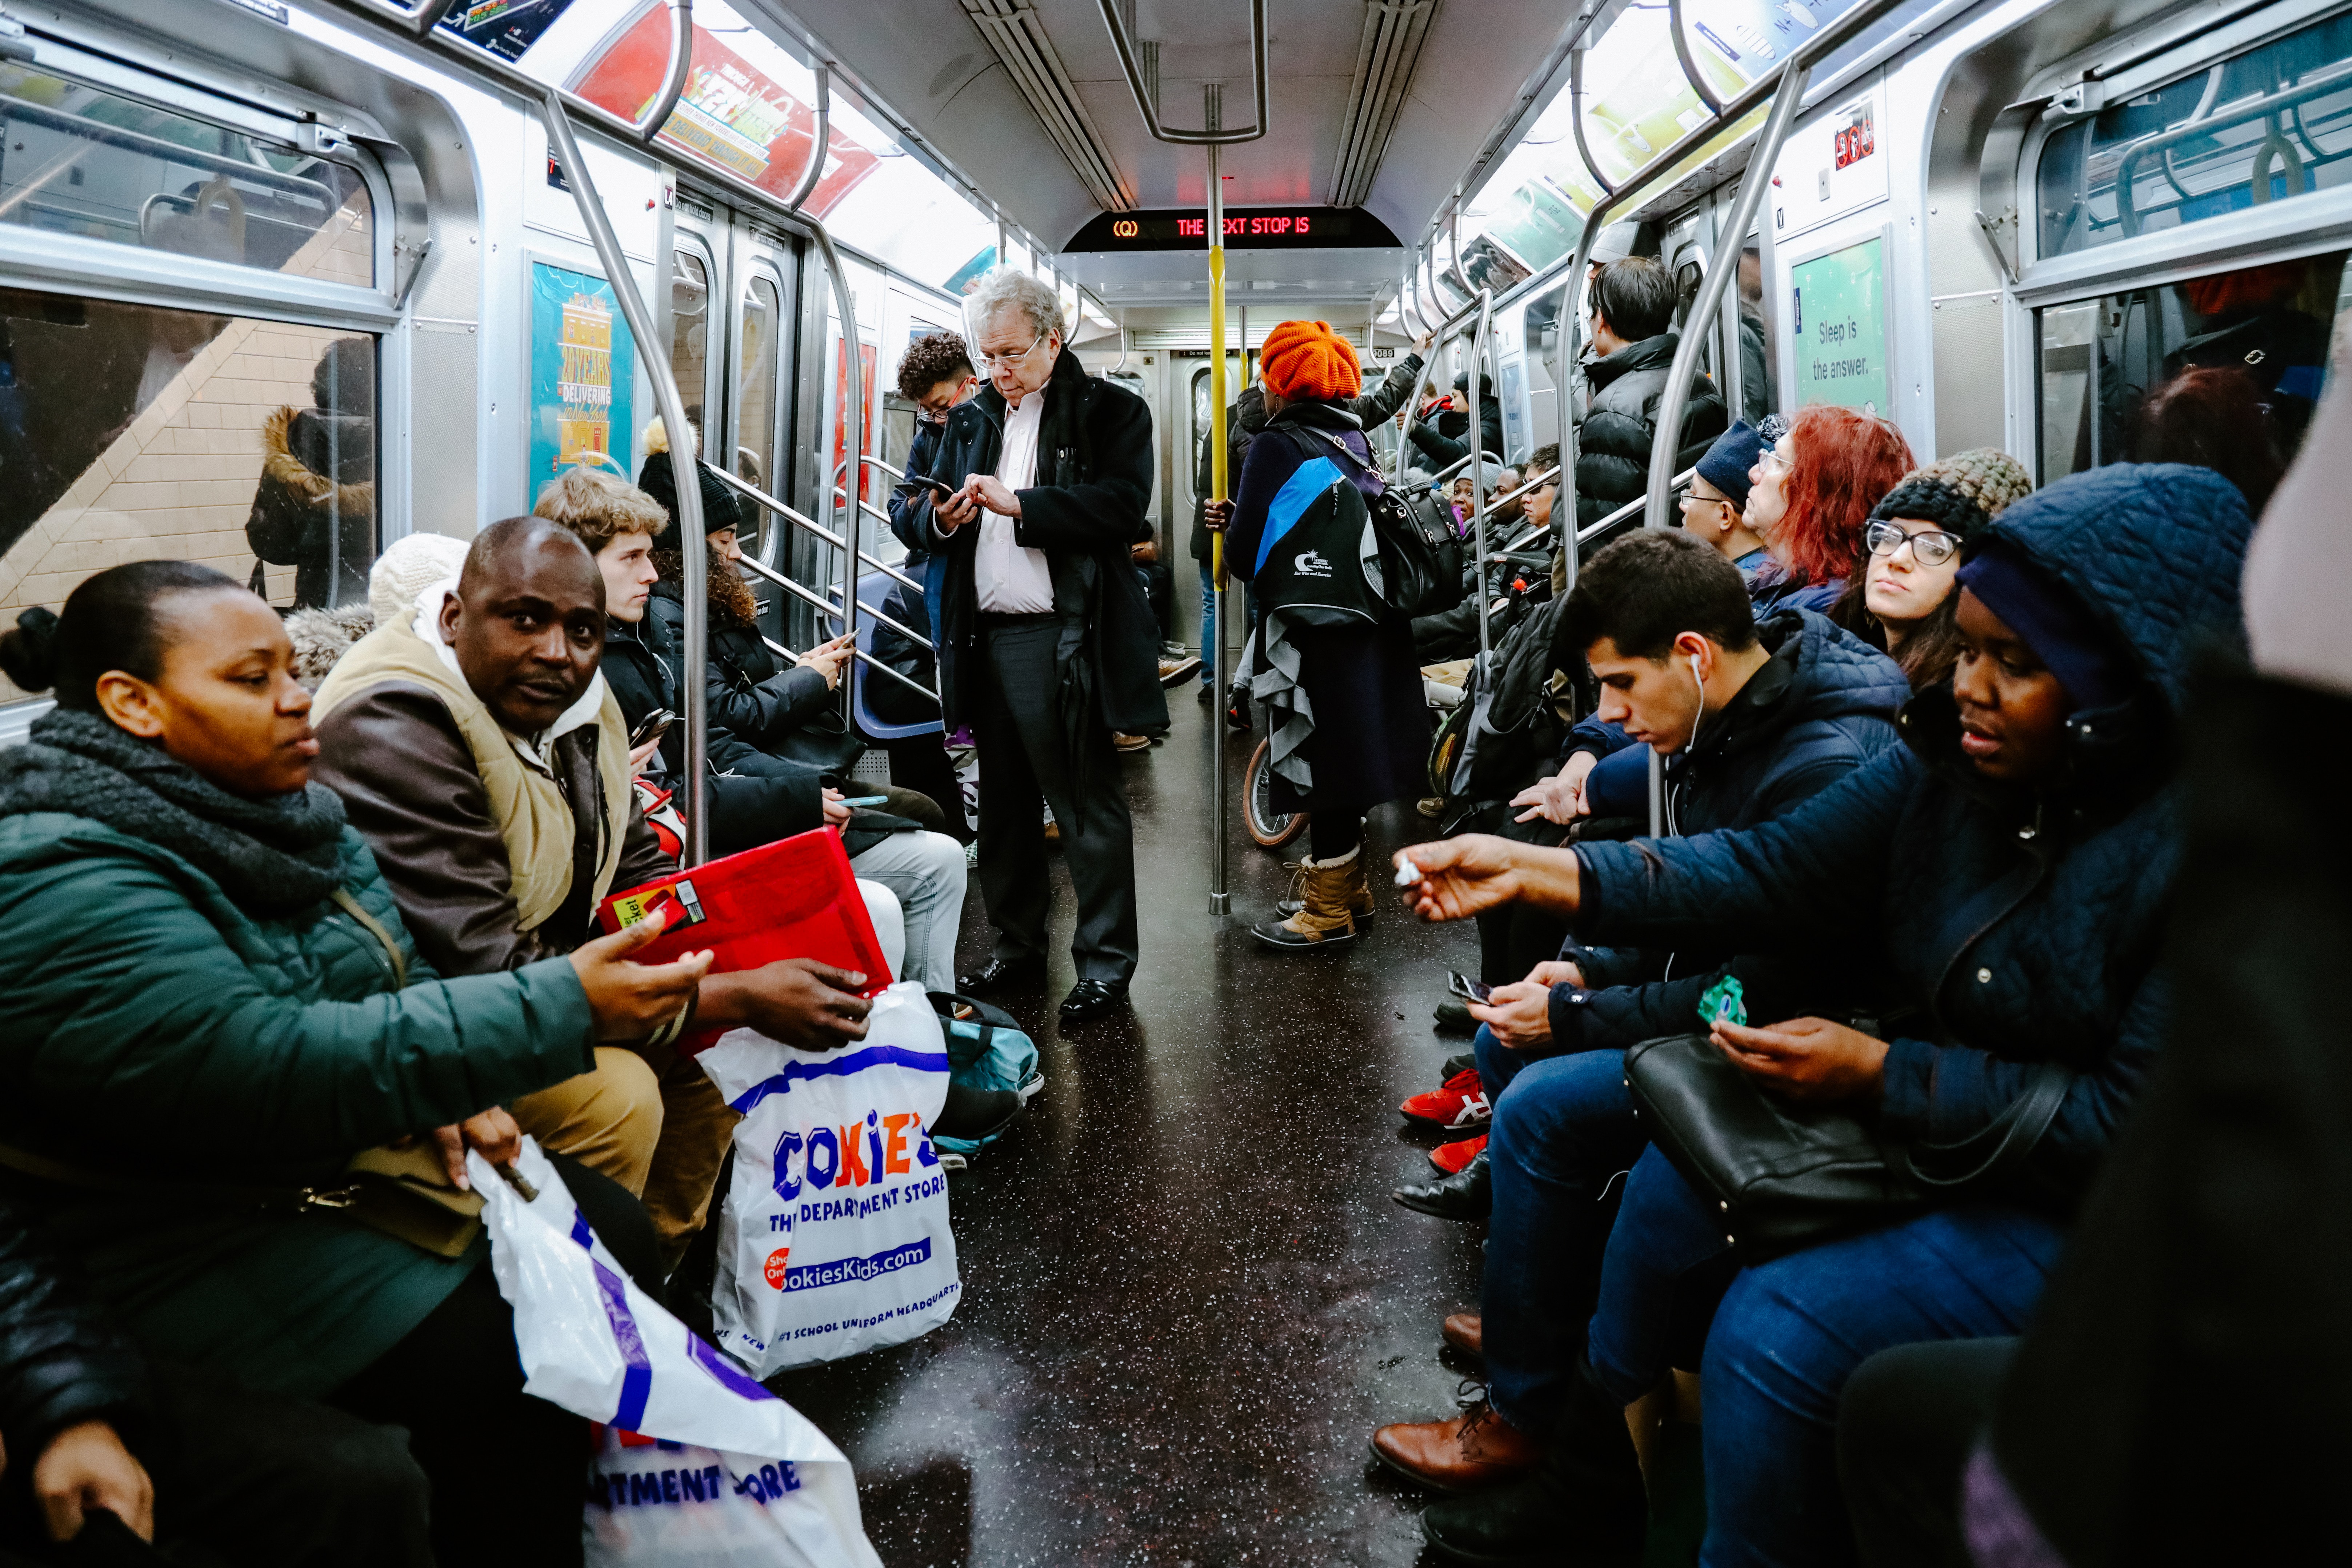 People sitting in crowded NYC subway